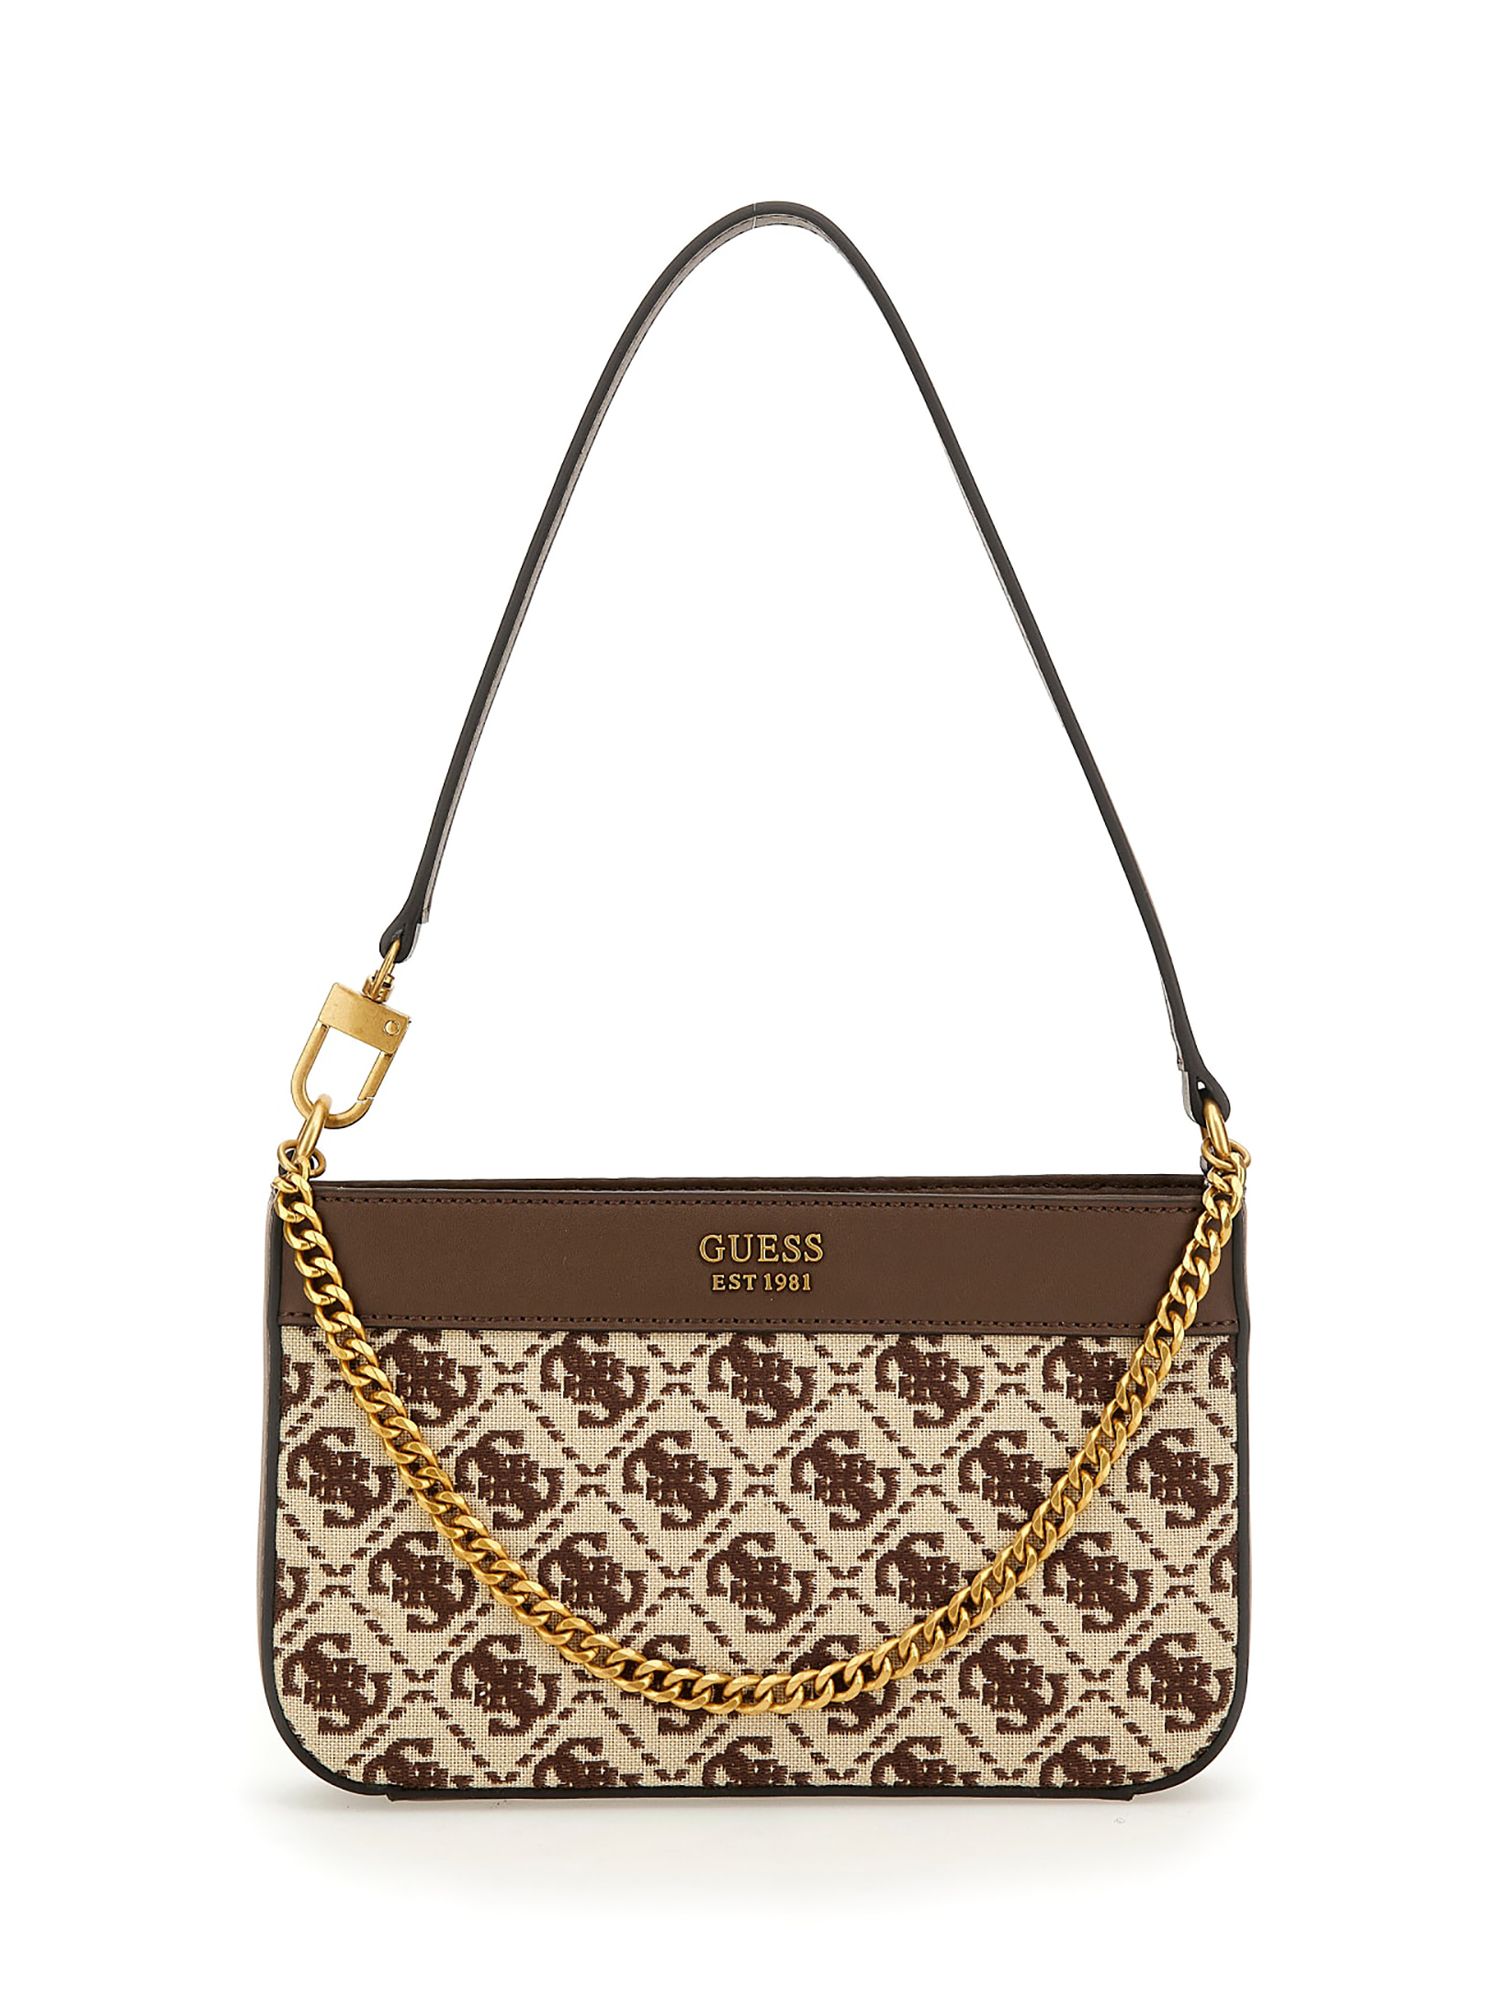 Buy Guess Katey Luxury Satchel Brown Bag from the Next UK online shop